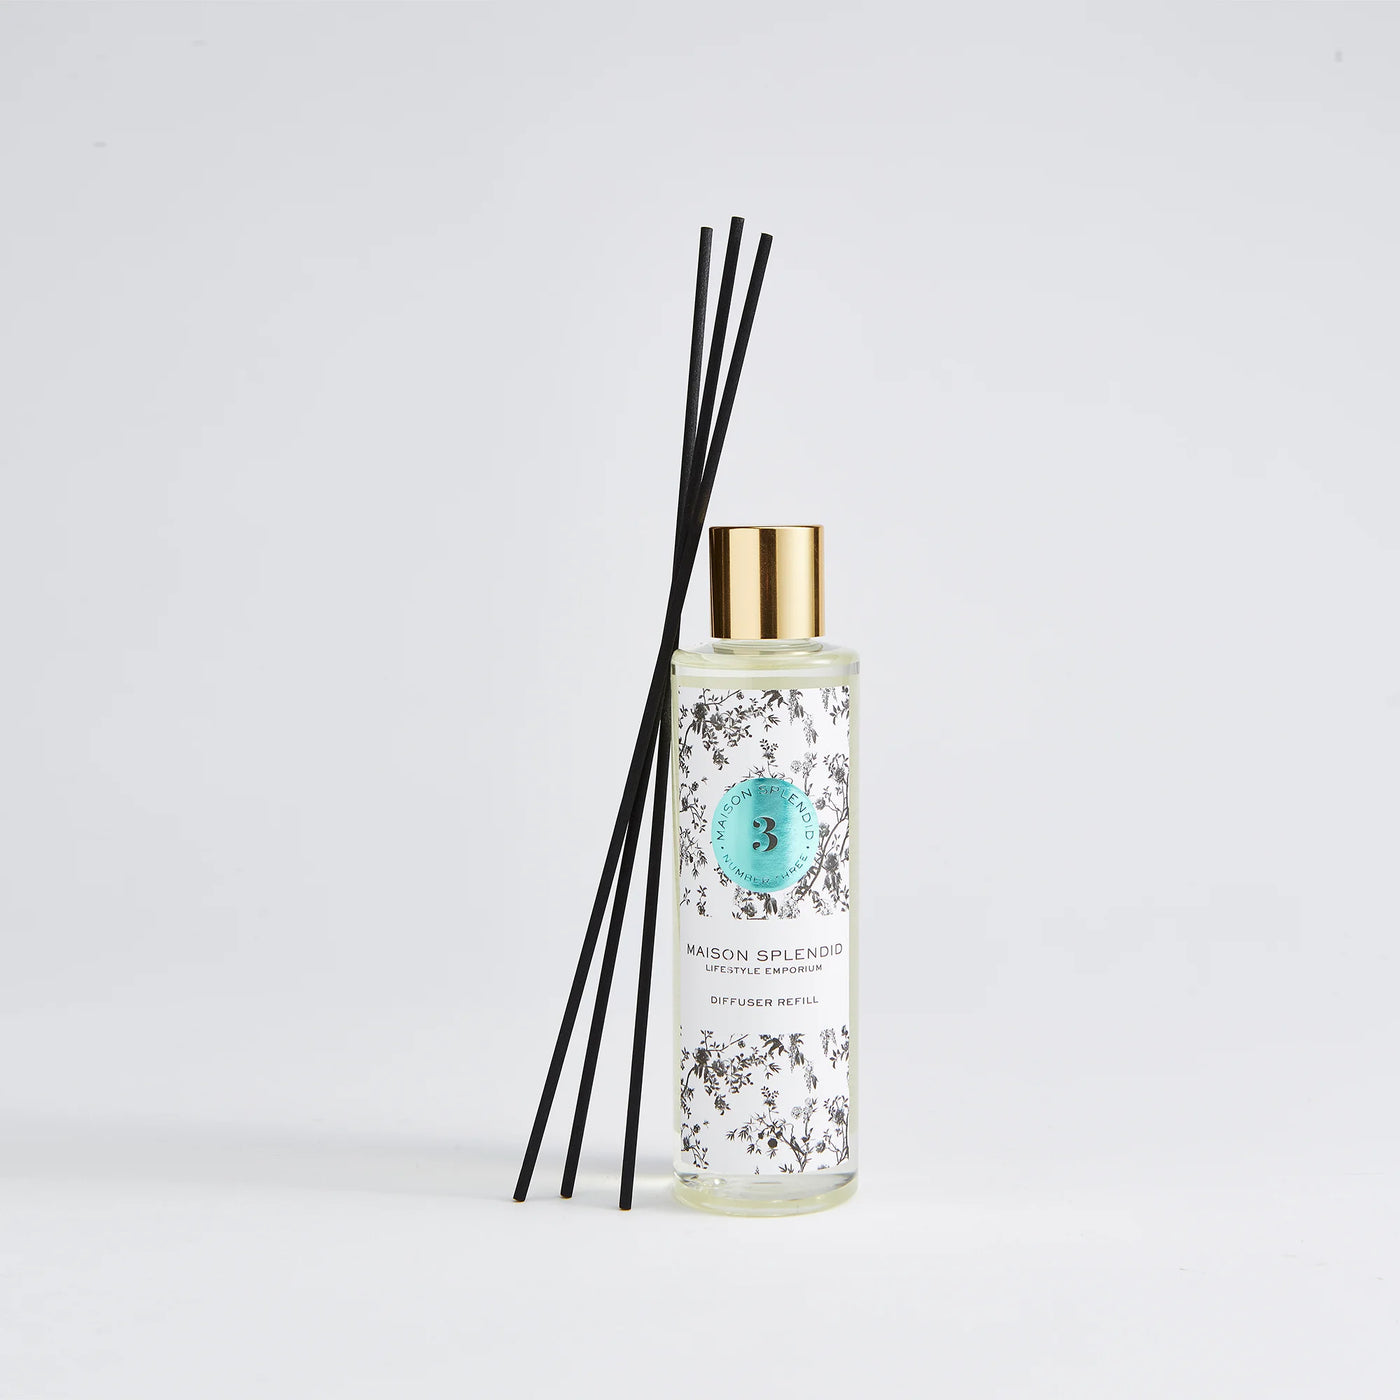 Maison Splendid number three fresh fragrance diffuser refill and reeds